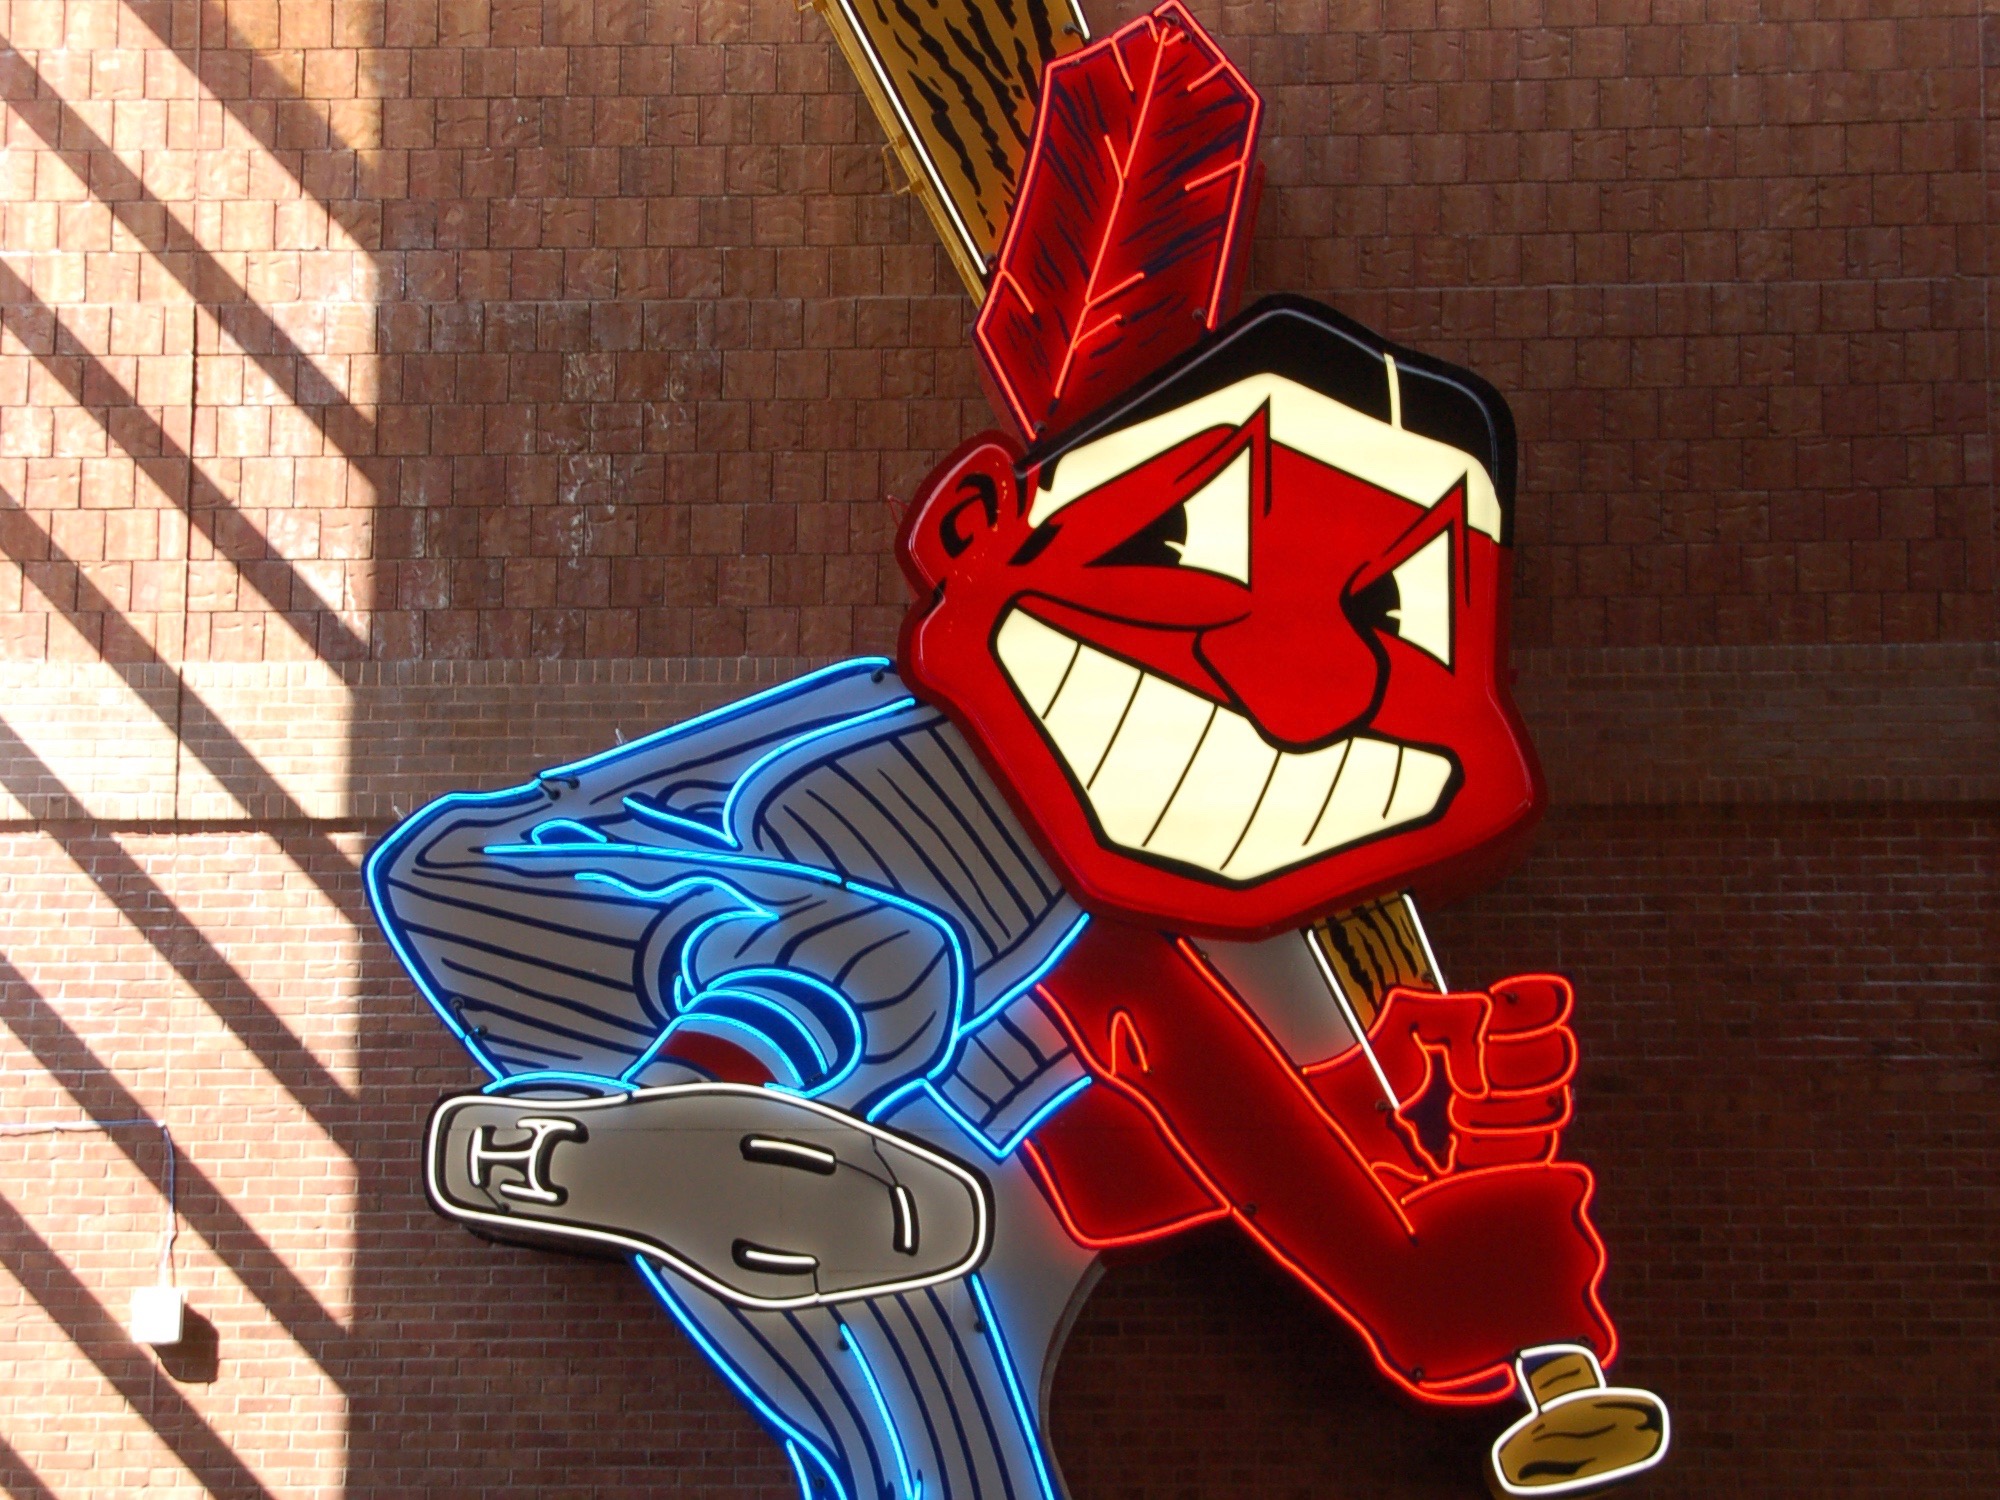 You won't see Chief Wahoo as much on Indians uniforms next year